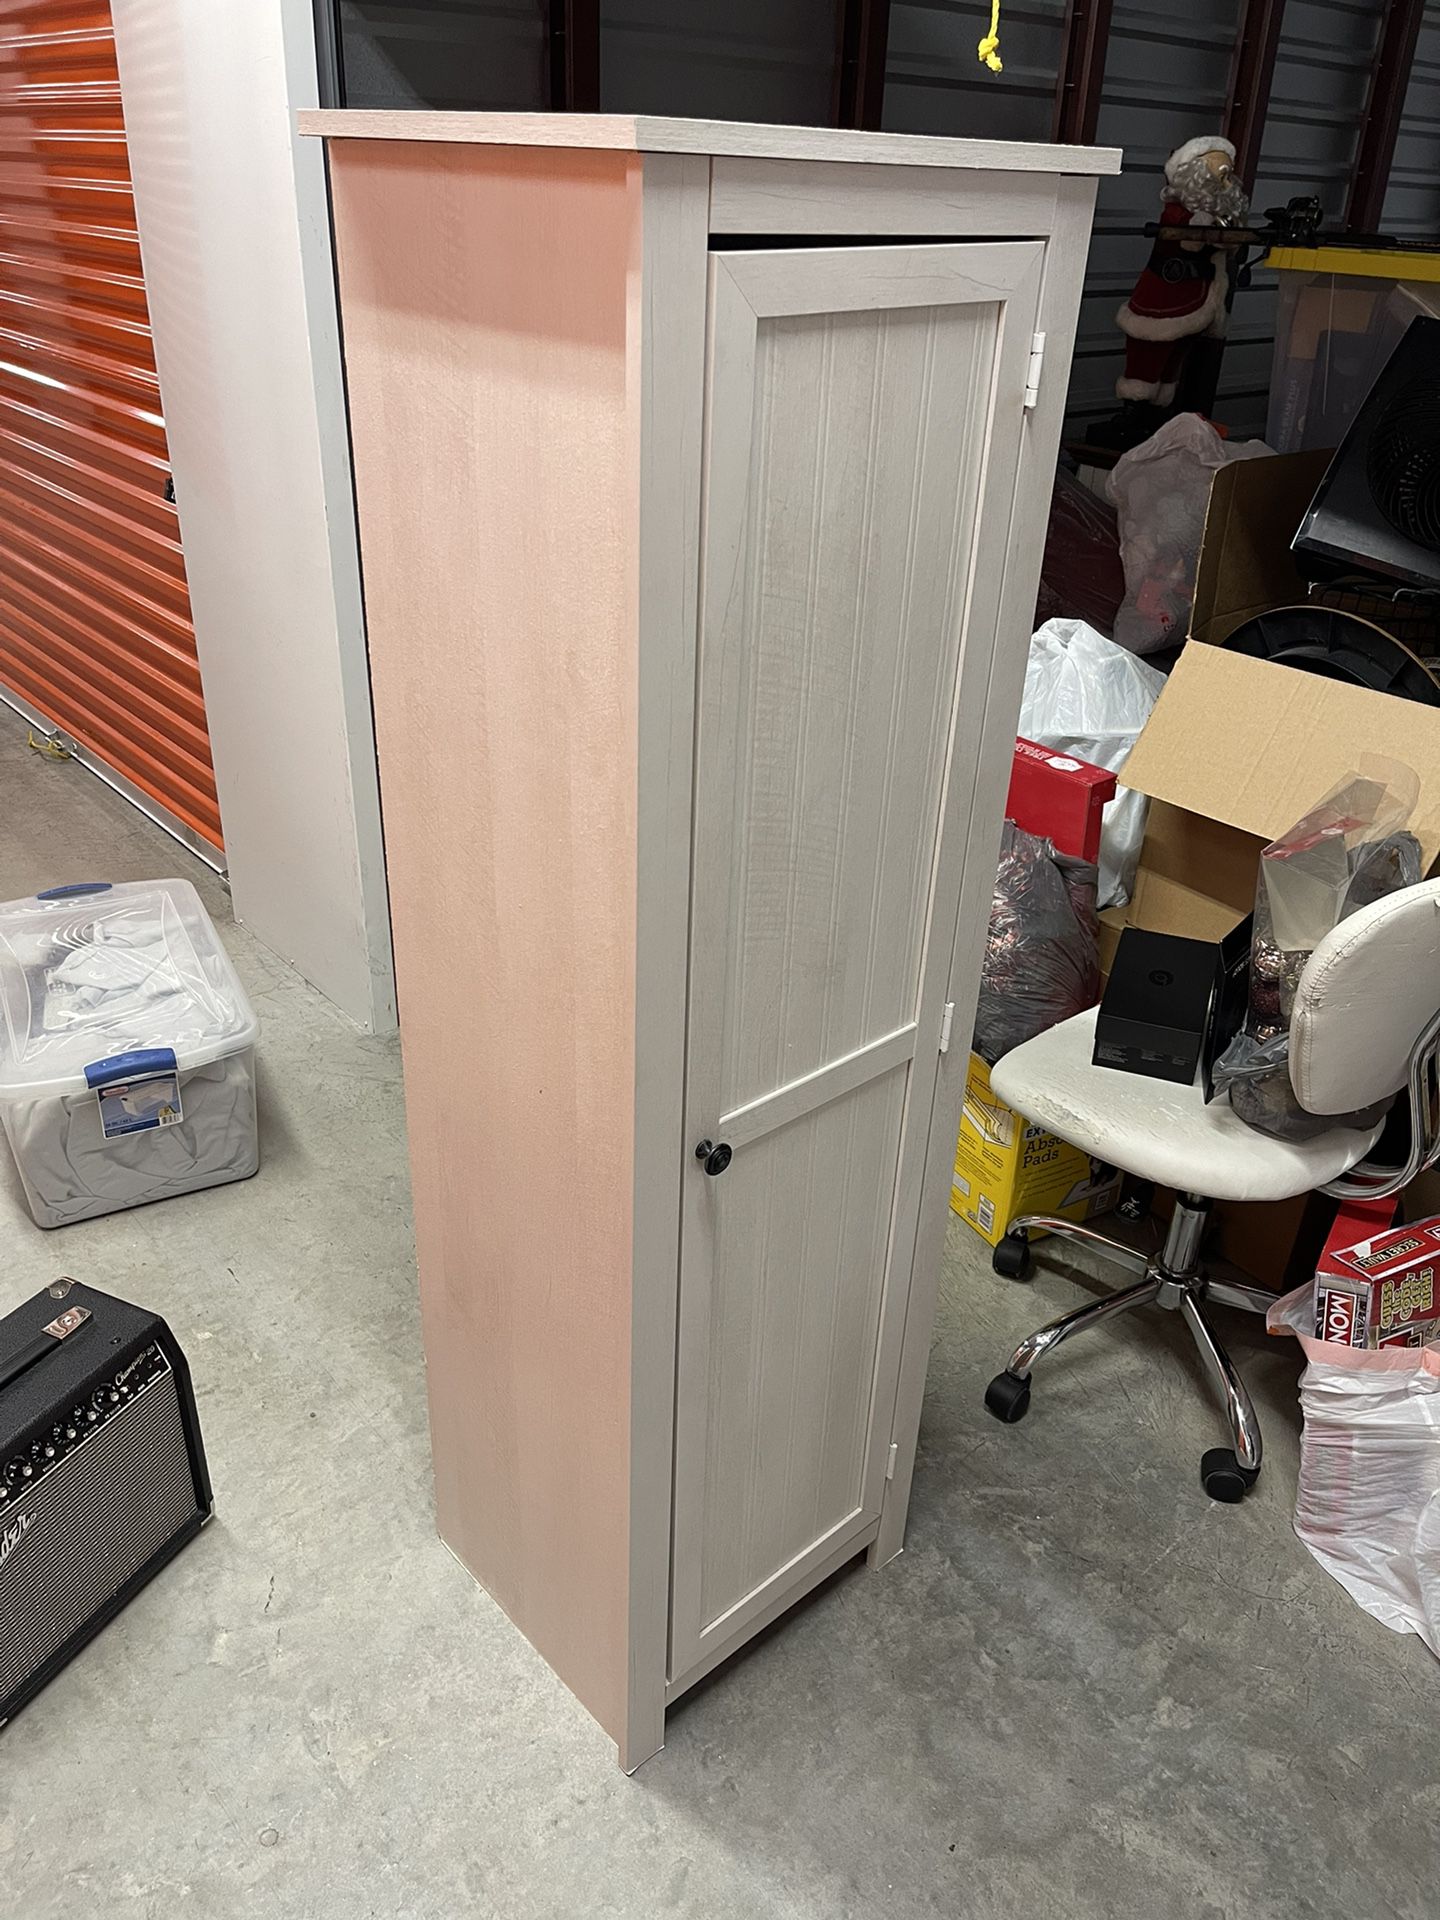 Cabinet (Like New) (Barely Used) use as kitchen pantry or bathroom cabinet 